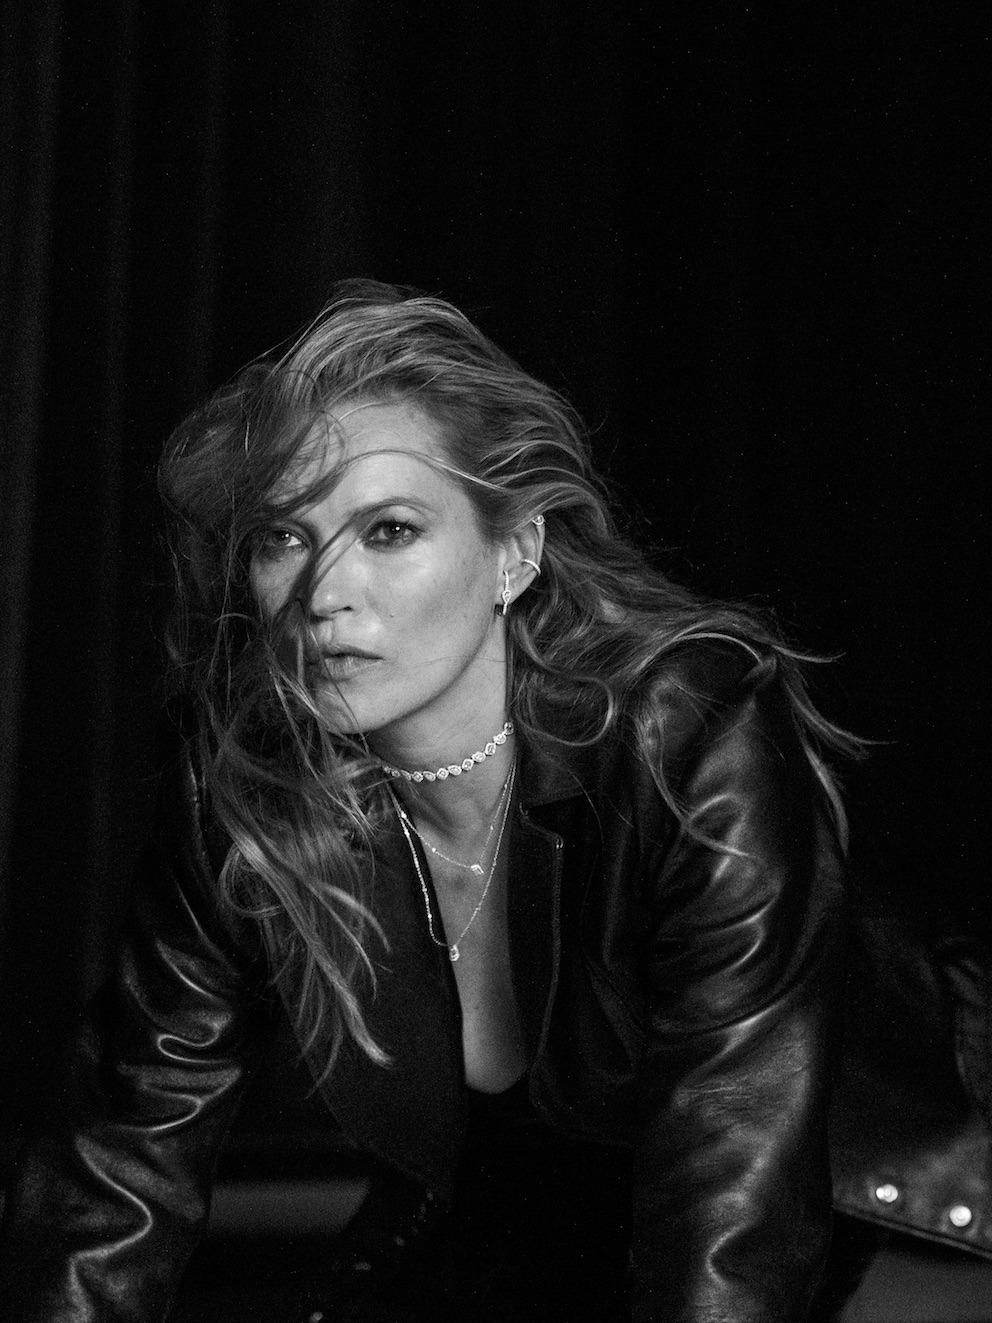 BTS KATE MOSS FOR MESSIKA SHOT BY MERT & MARCUS (9)